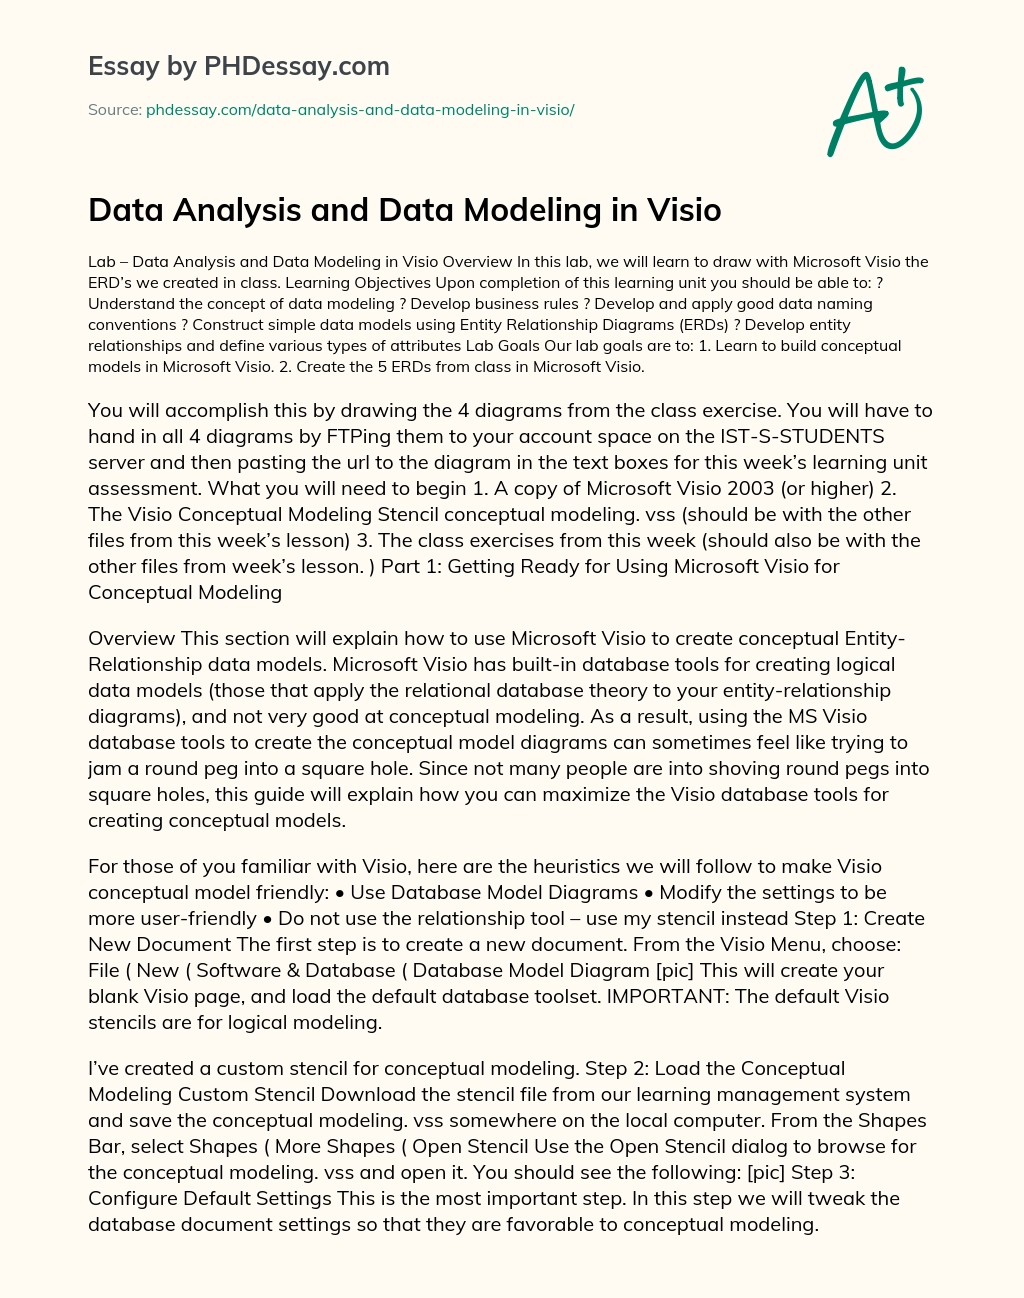 Data Analysis and Data Modeling in Visio essay